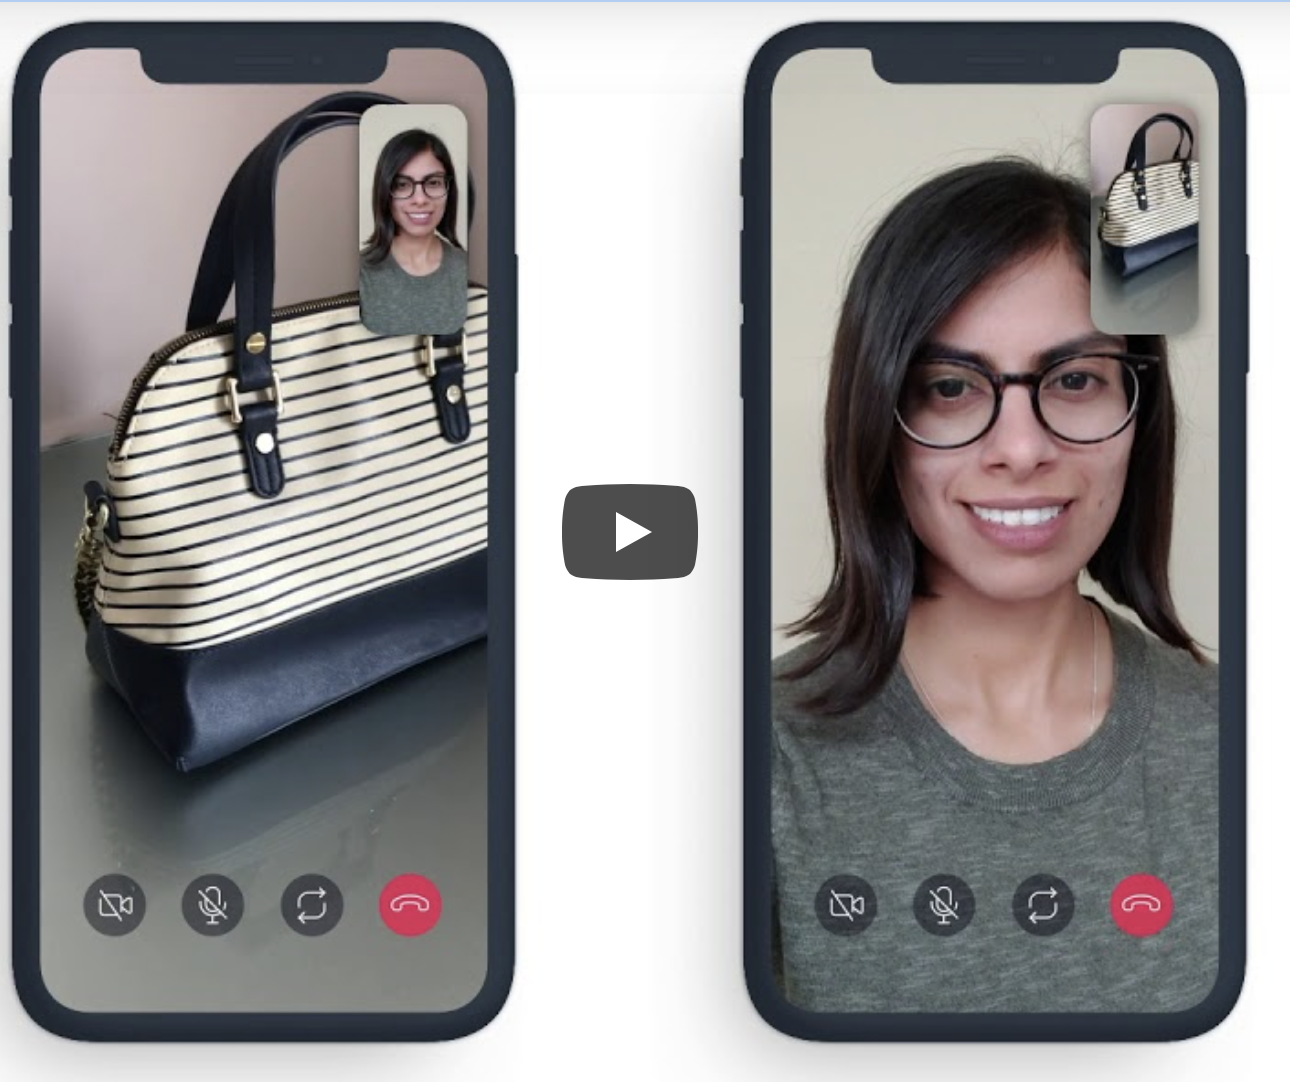 Tulip launches Video Chat to connect store associates, customers in real time